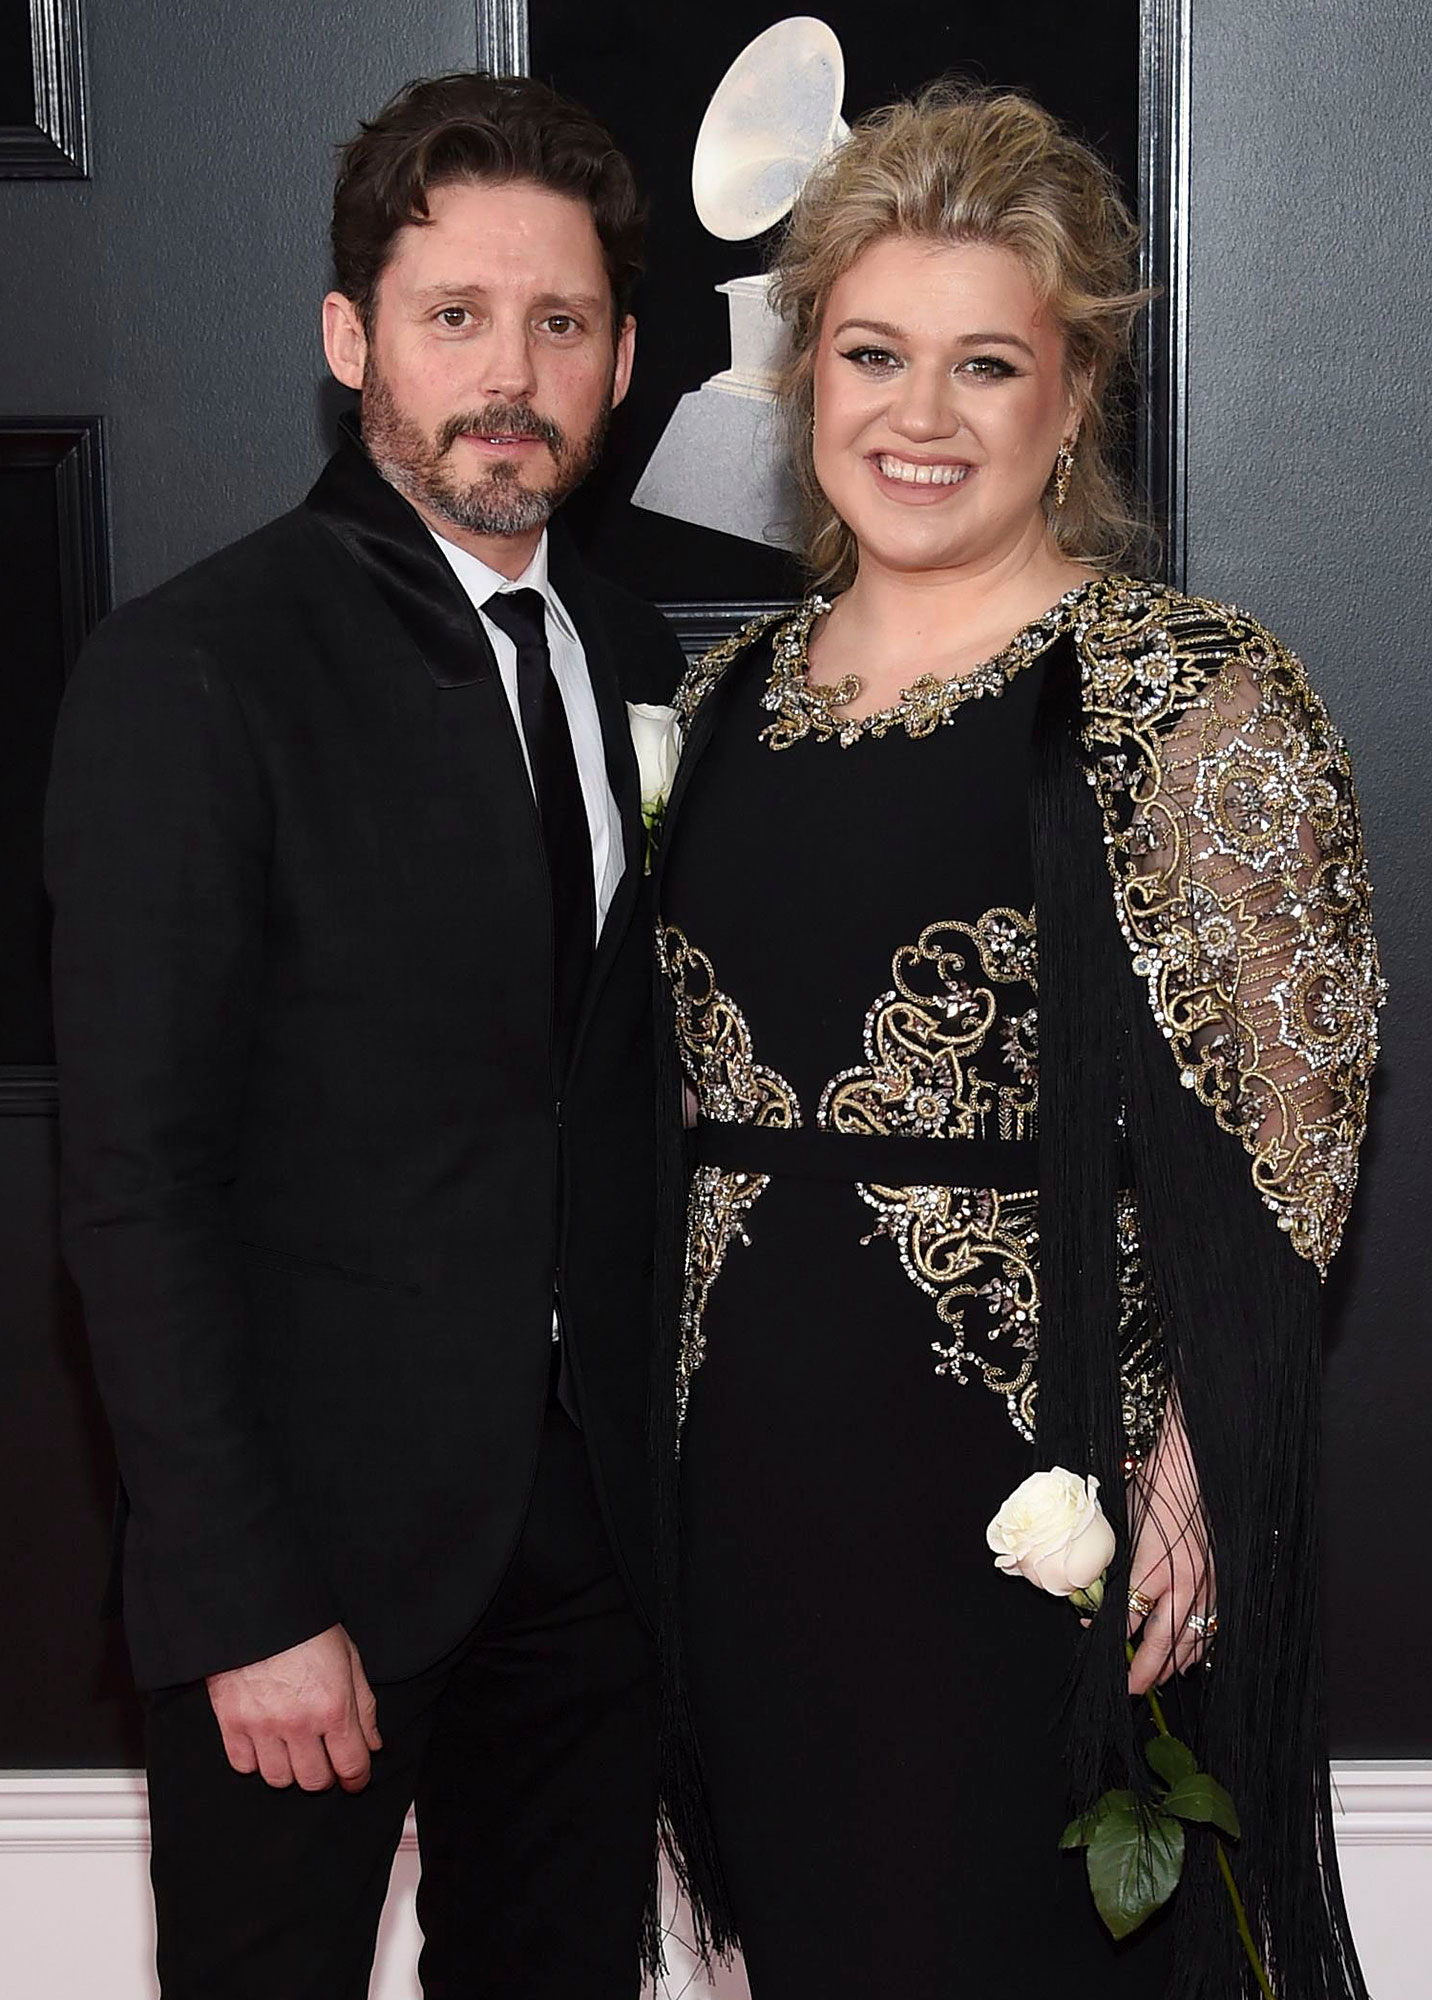 Kelly Clarkson and Brandon Blackstock’s Messy Divorce Everything We Know